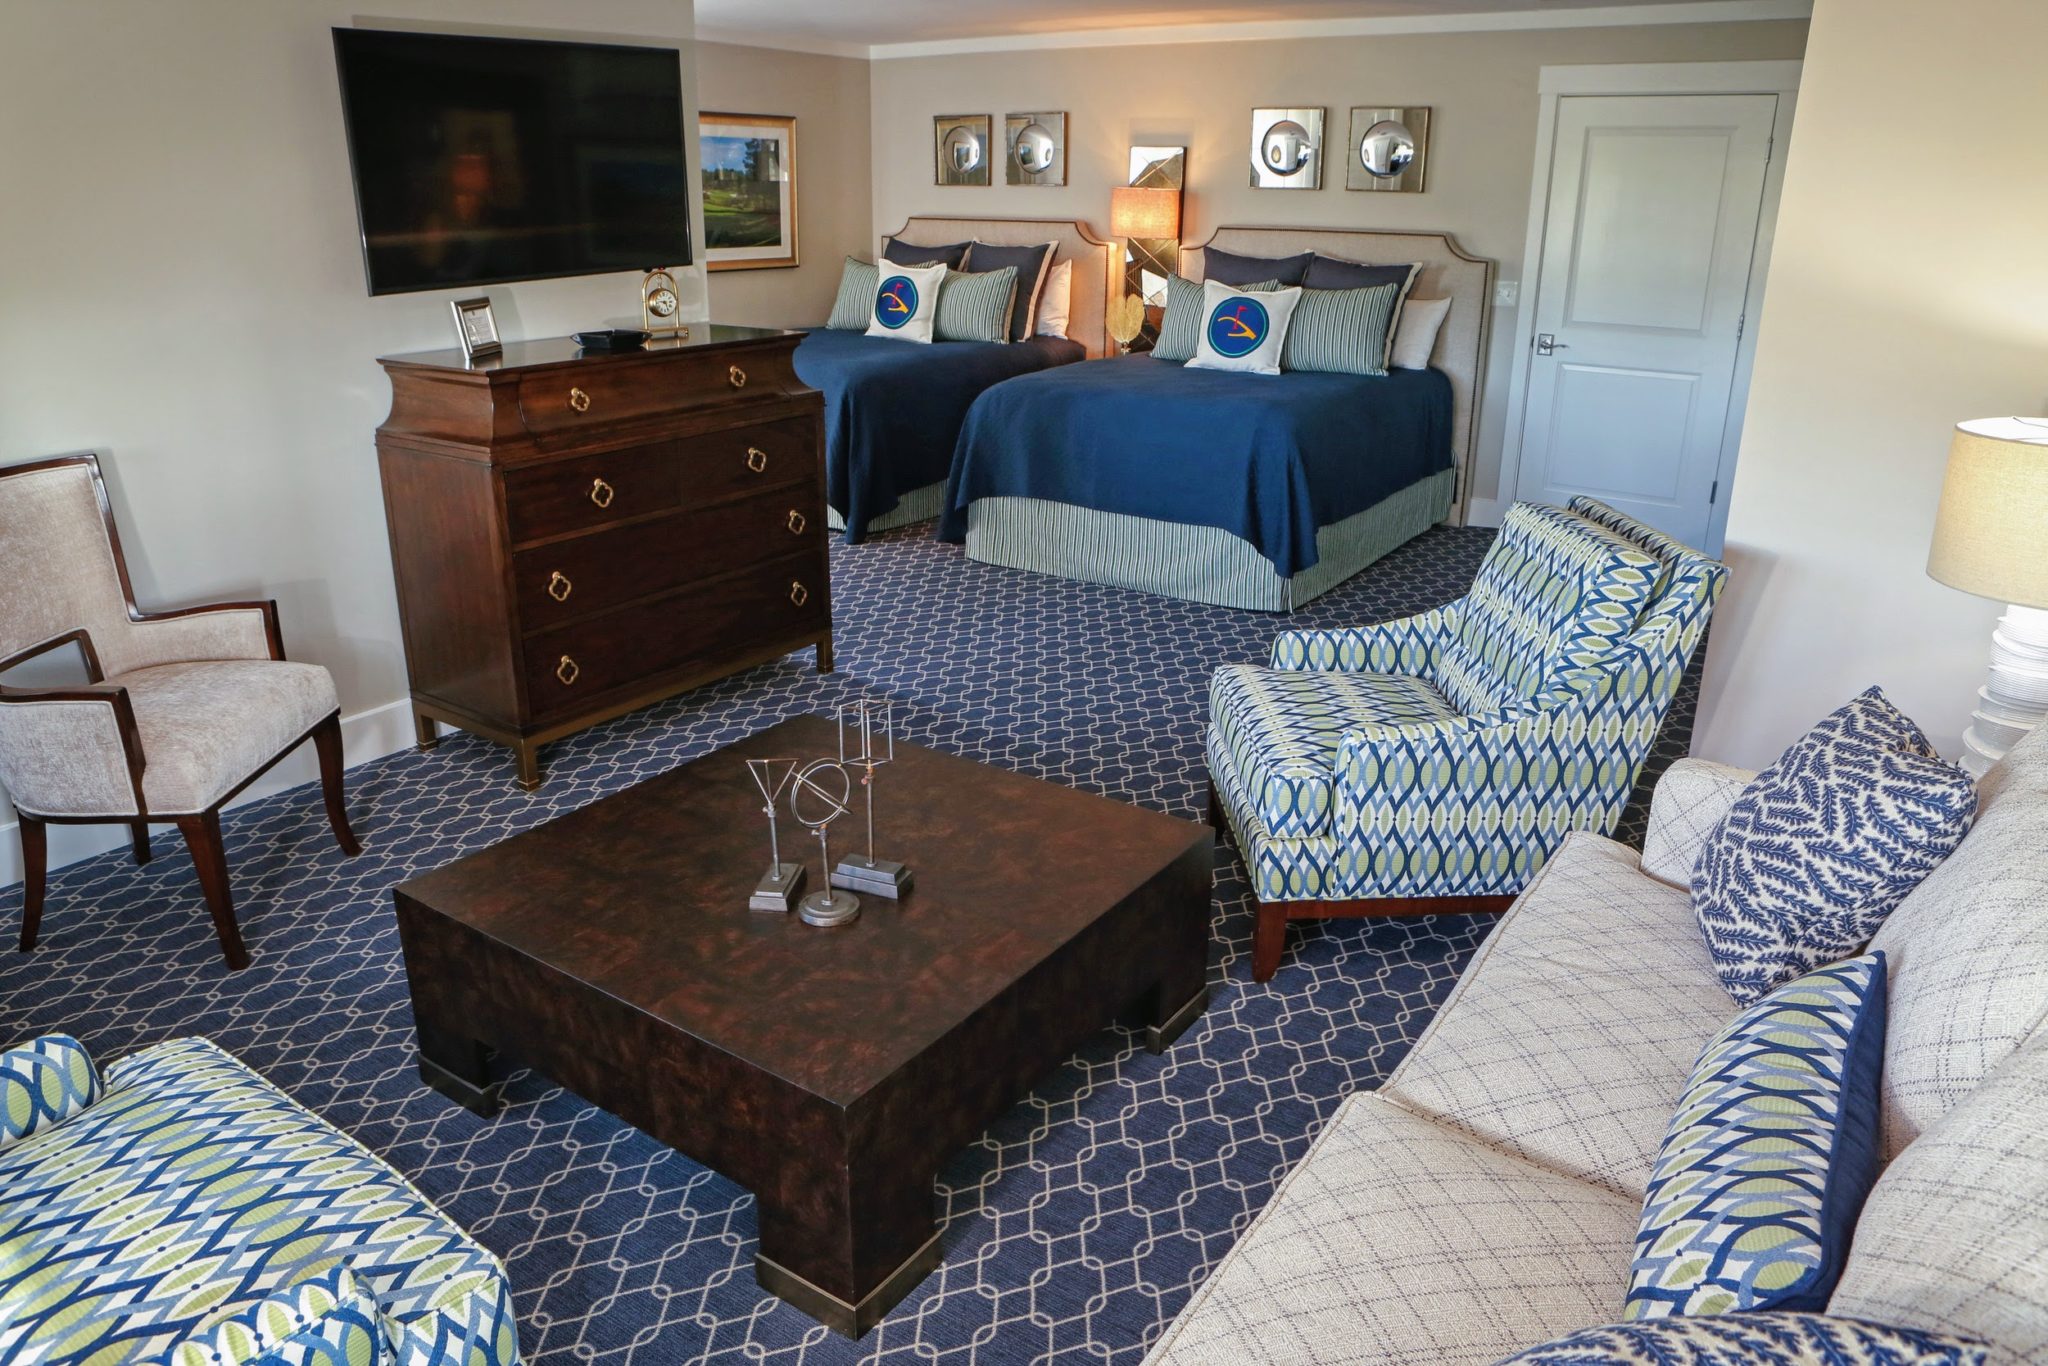 Eagle Point Golf Club - Accommodations - Bedroom 1